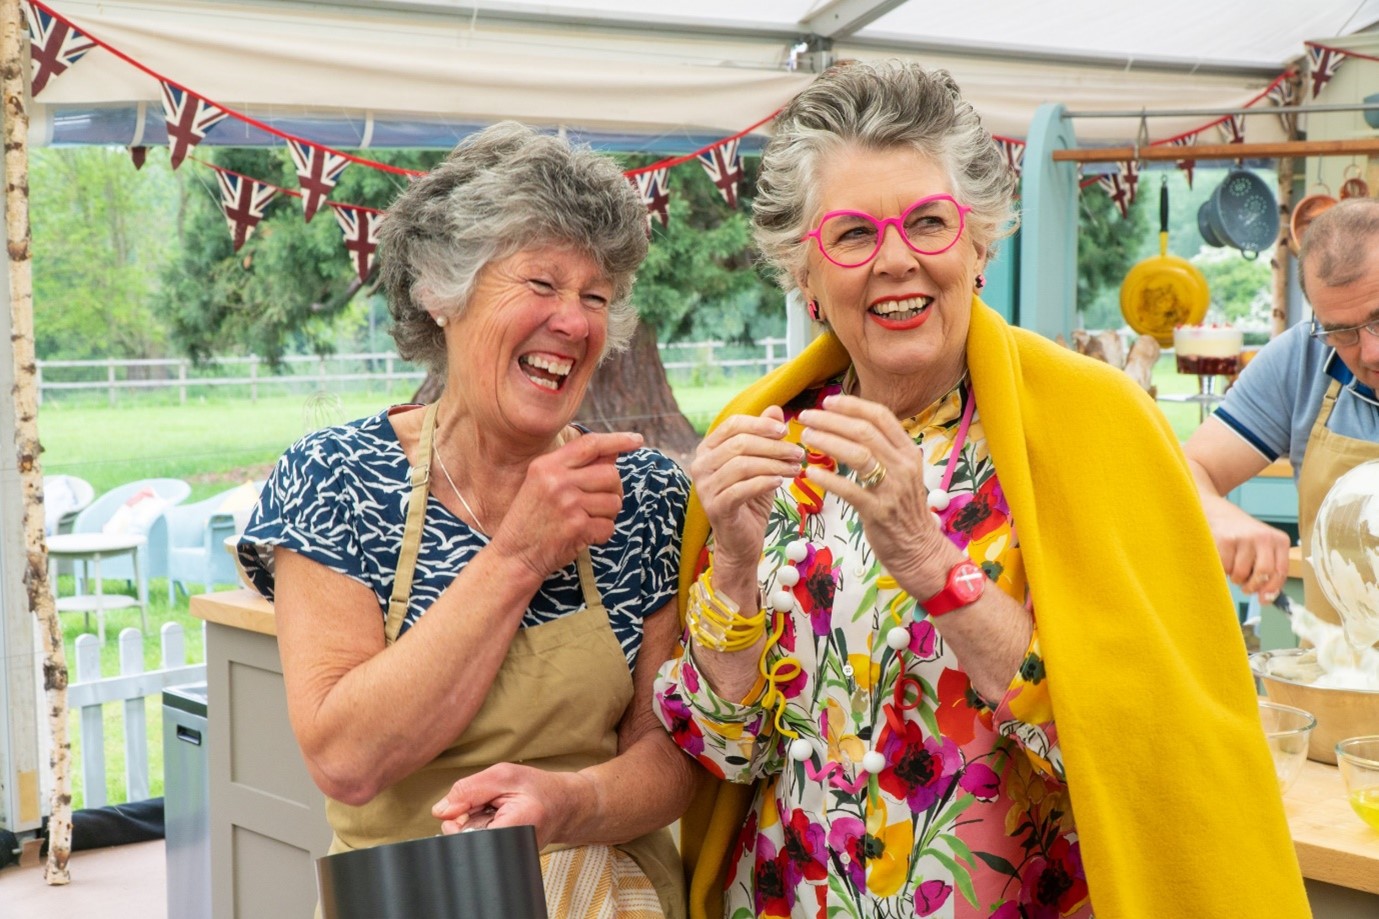 Prue Leith Net Worth: With lookalike contestant Maggie.